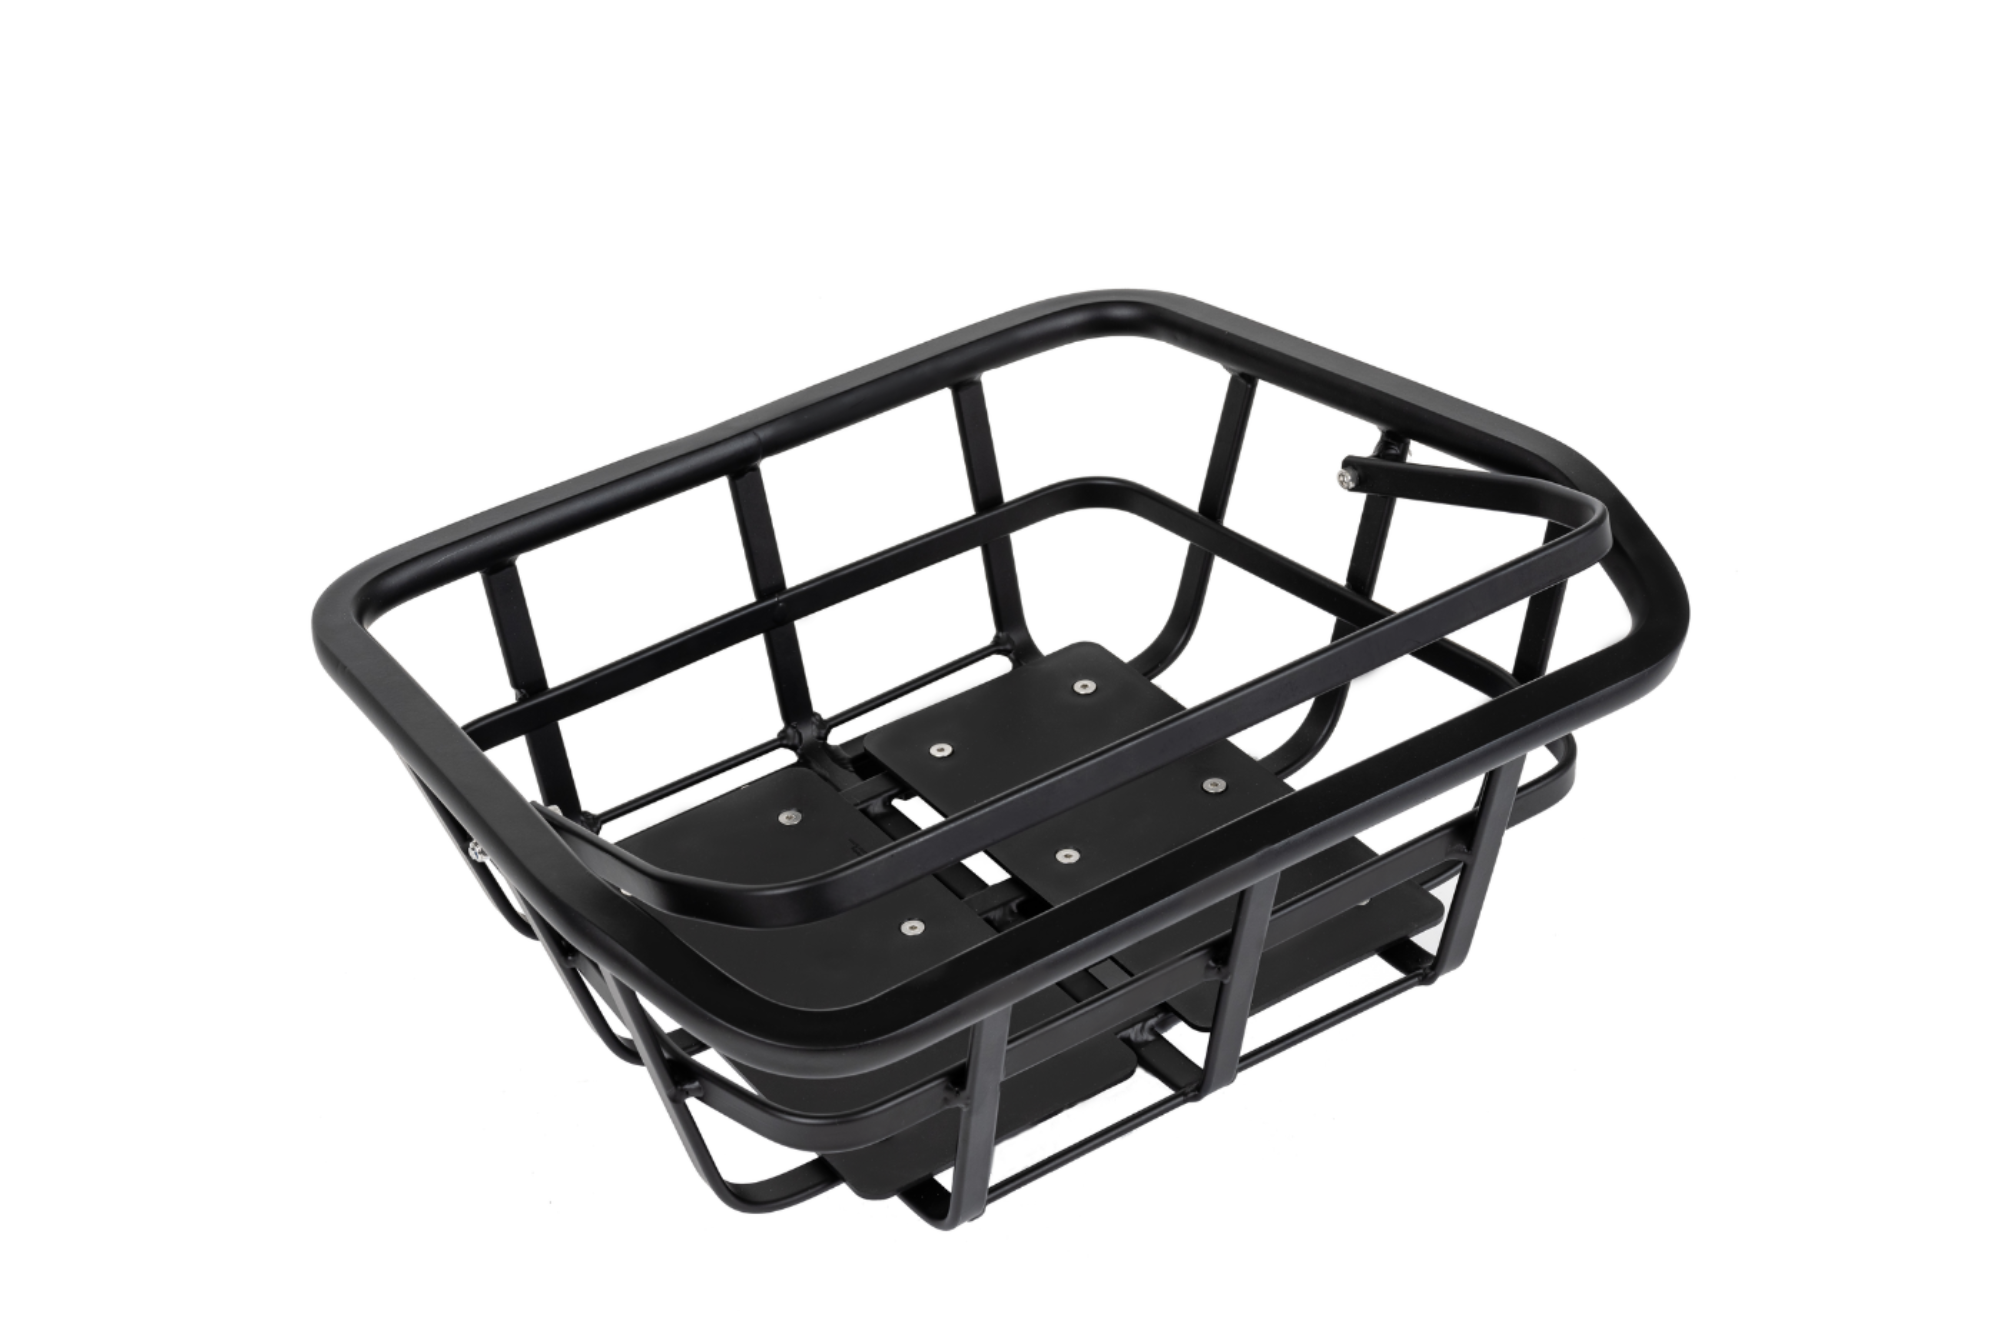 Our custom-made rear basket is a convenient easy on/easy off basket that is there when you need it.  Great for quick trips to the farmers market or for a long day of exploring town. This clever design even boasts a handy carrying handle